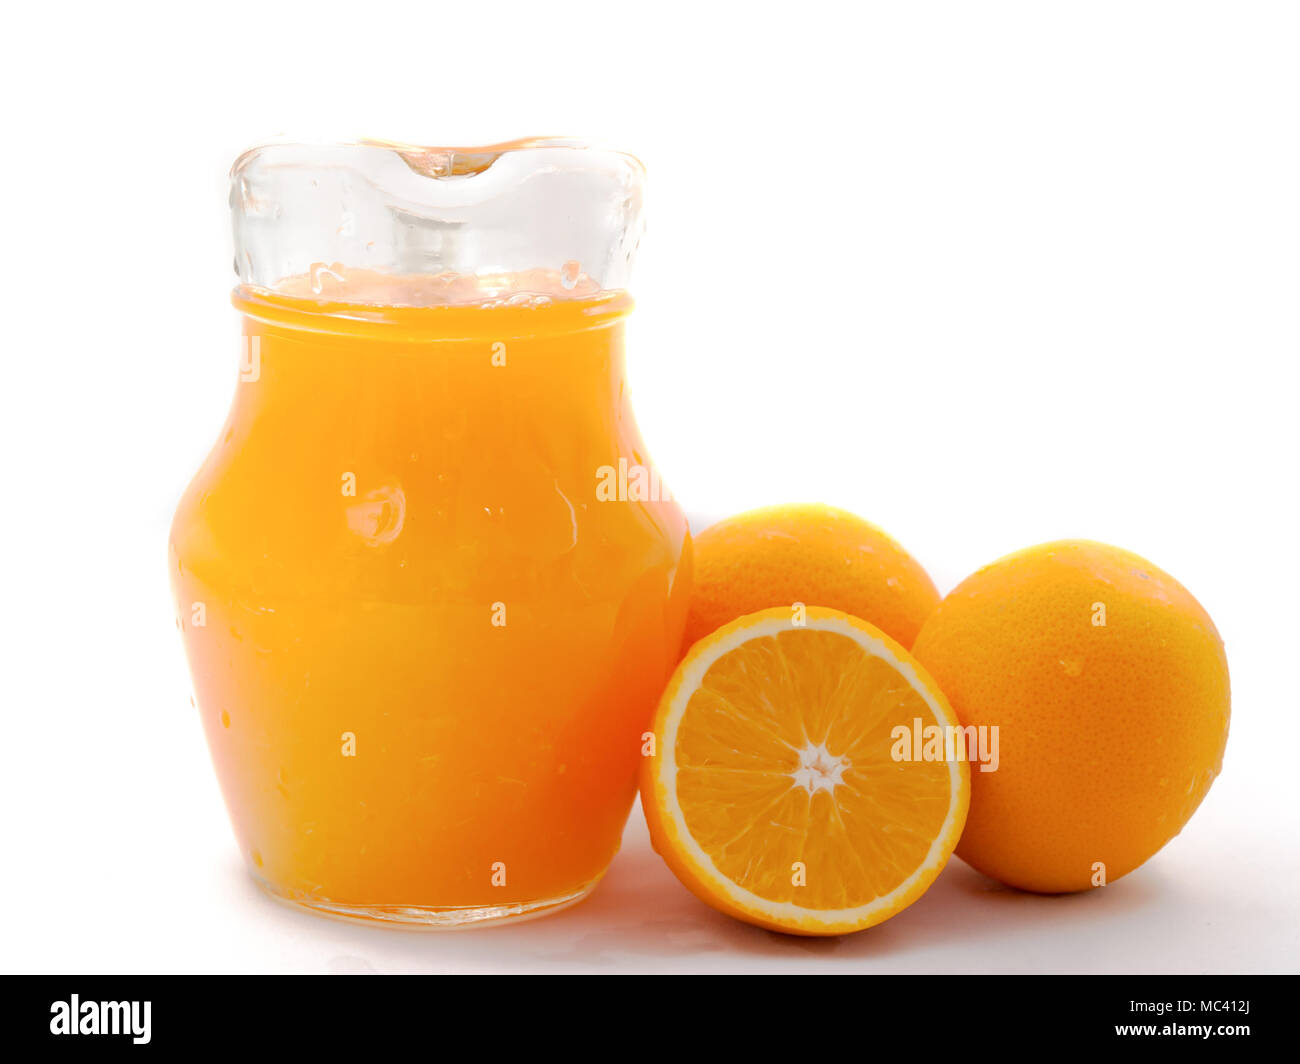 Orange, fruit. , Foods high in vitamin C. Placed on a white background. Stock Photo